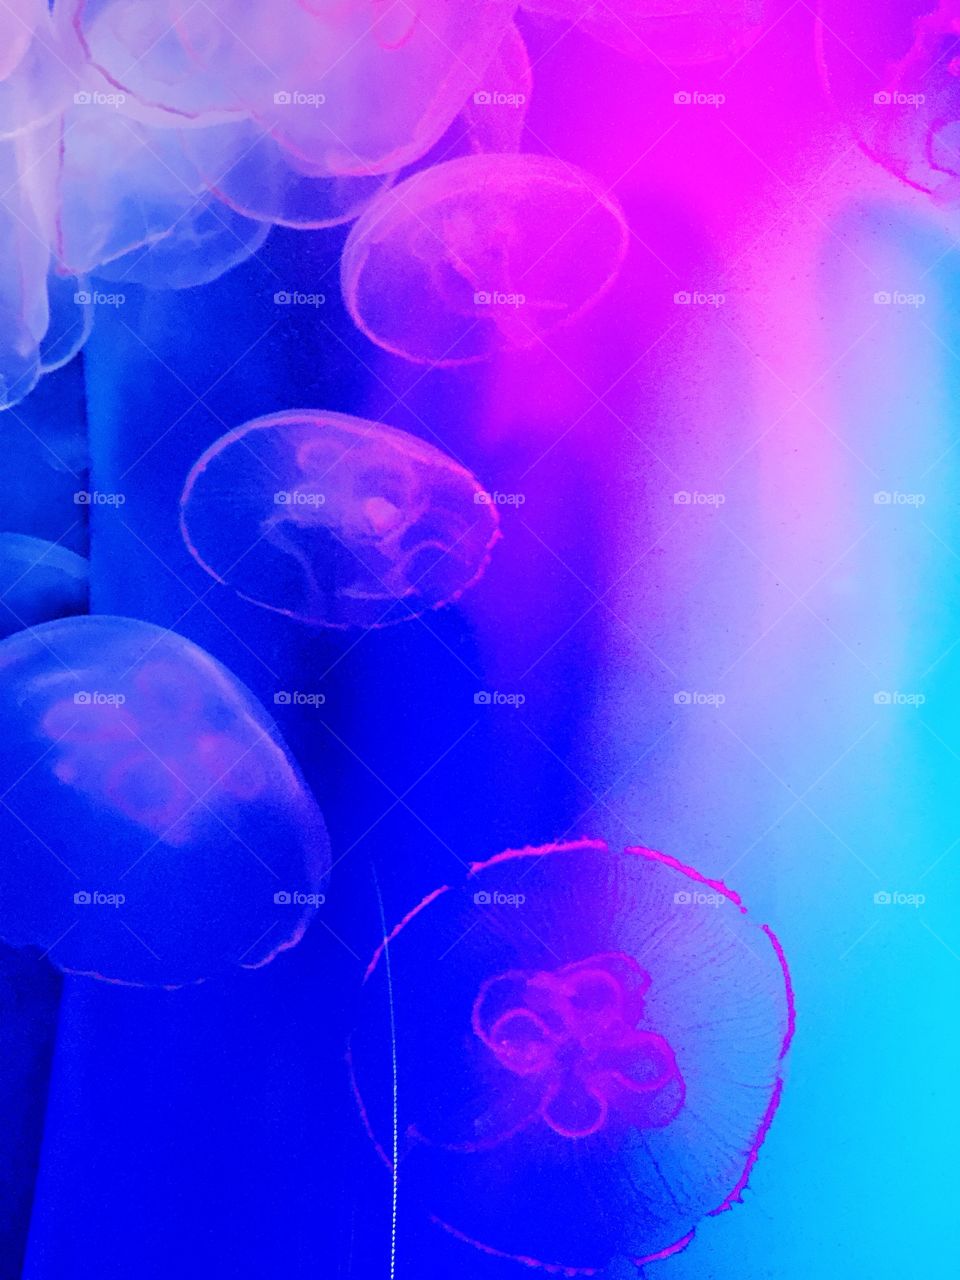 My little weekend with this huage Aquarium of small Jellyfish. Very amazing place with a lot of species from the ocean